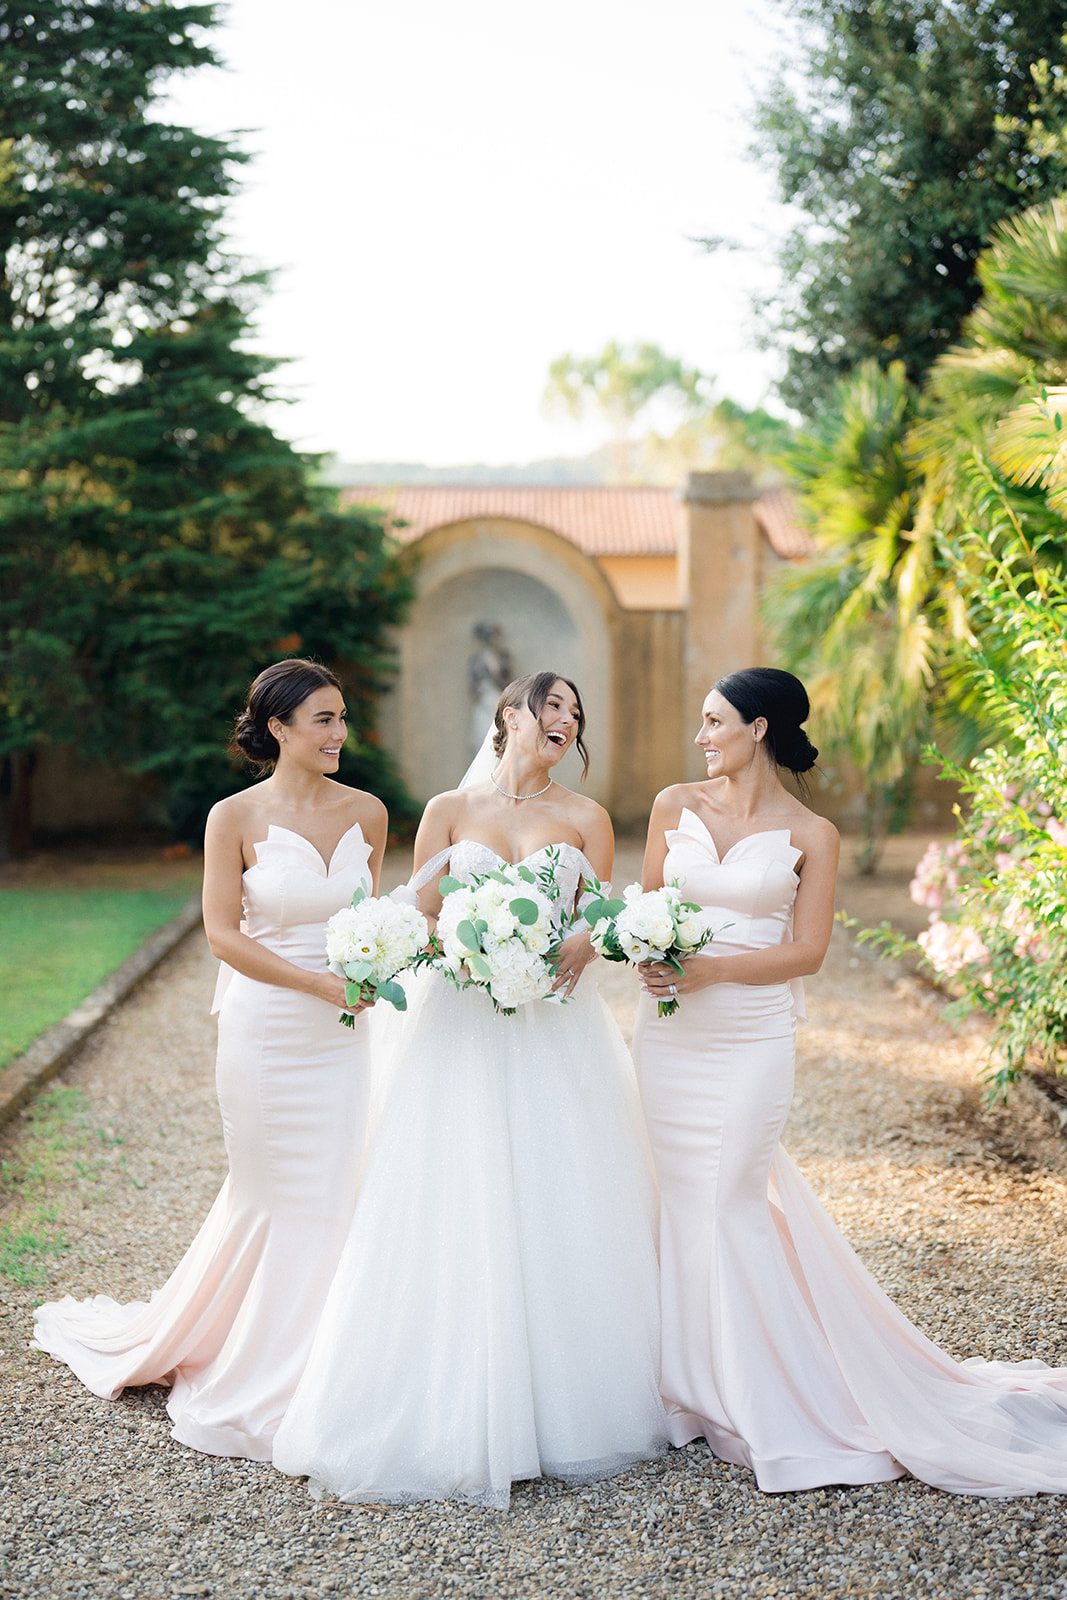 the bride and her sisters while posing for a group photo